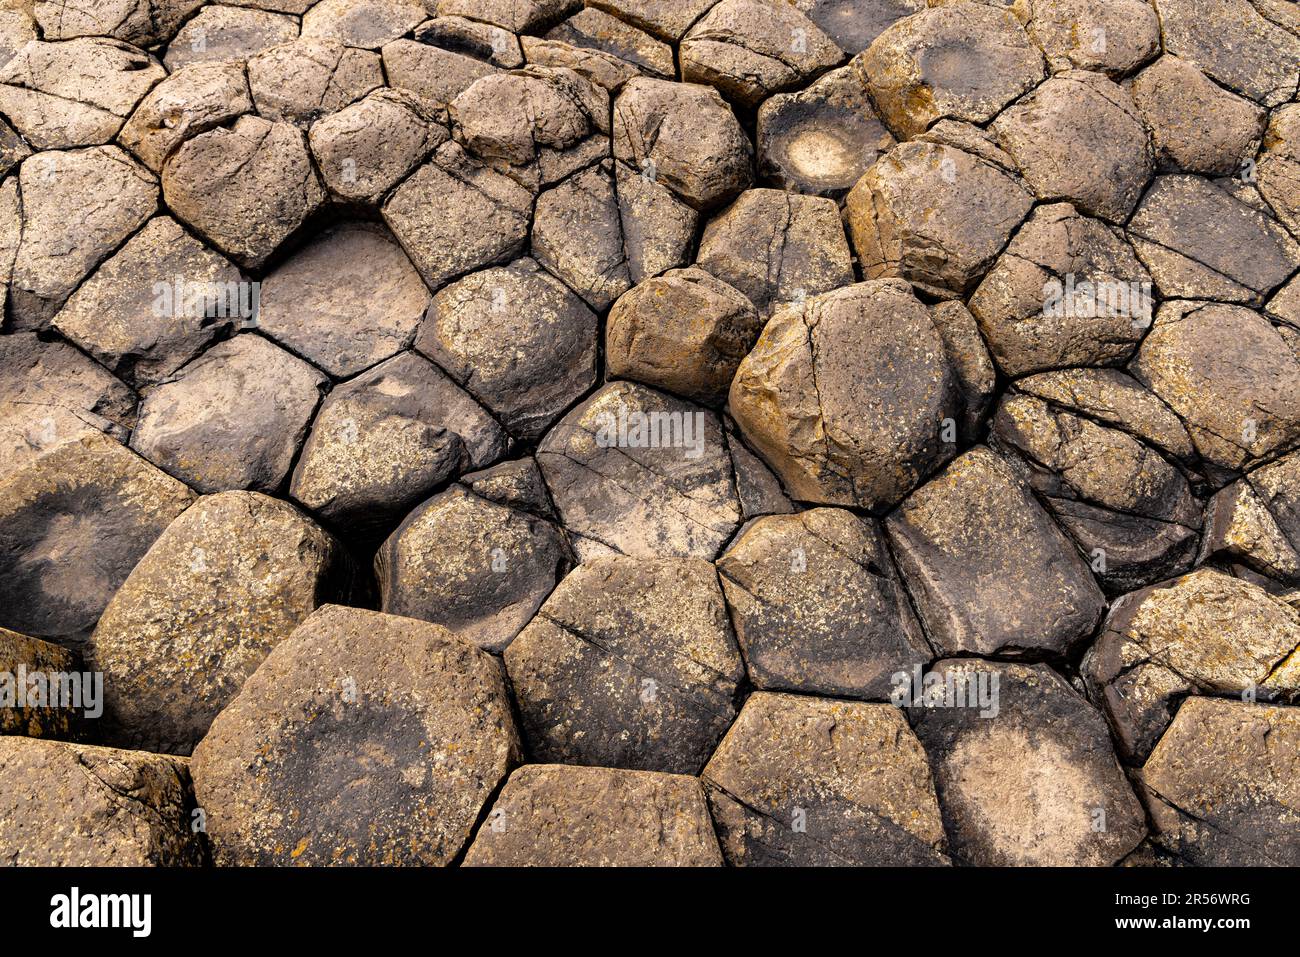 Interlocking basalt formations at the Giant's Causeway, Bushmills, County Antrim, Northern Ireland, a famous UNESCO World Heritage Site. Stock Photo